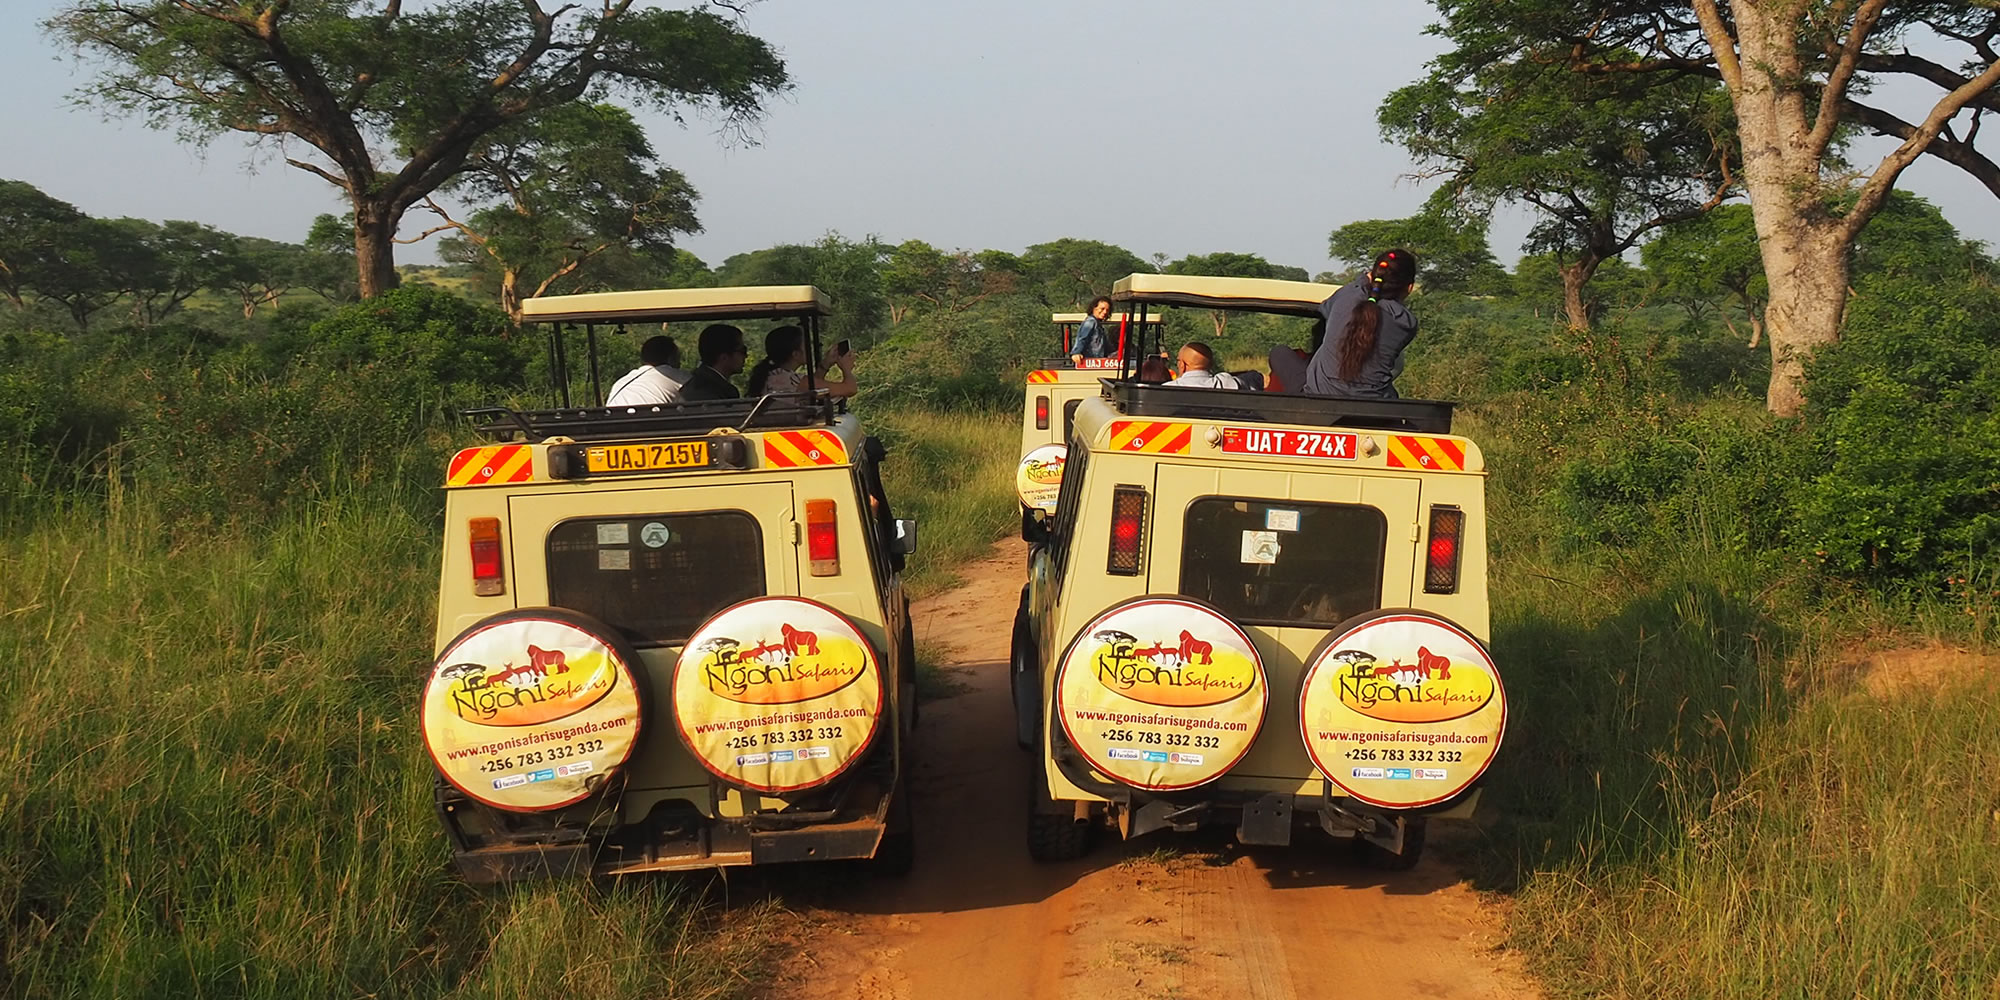 Our Group of Travellers Having Game Drive at Murchison Falls National Park.